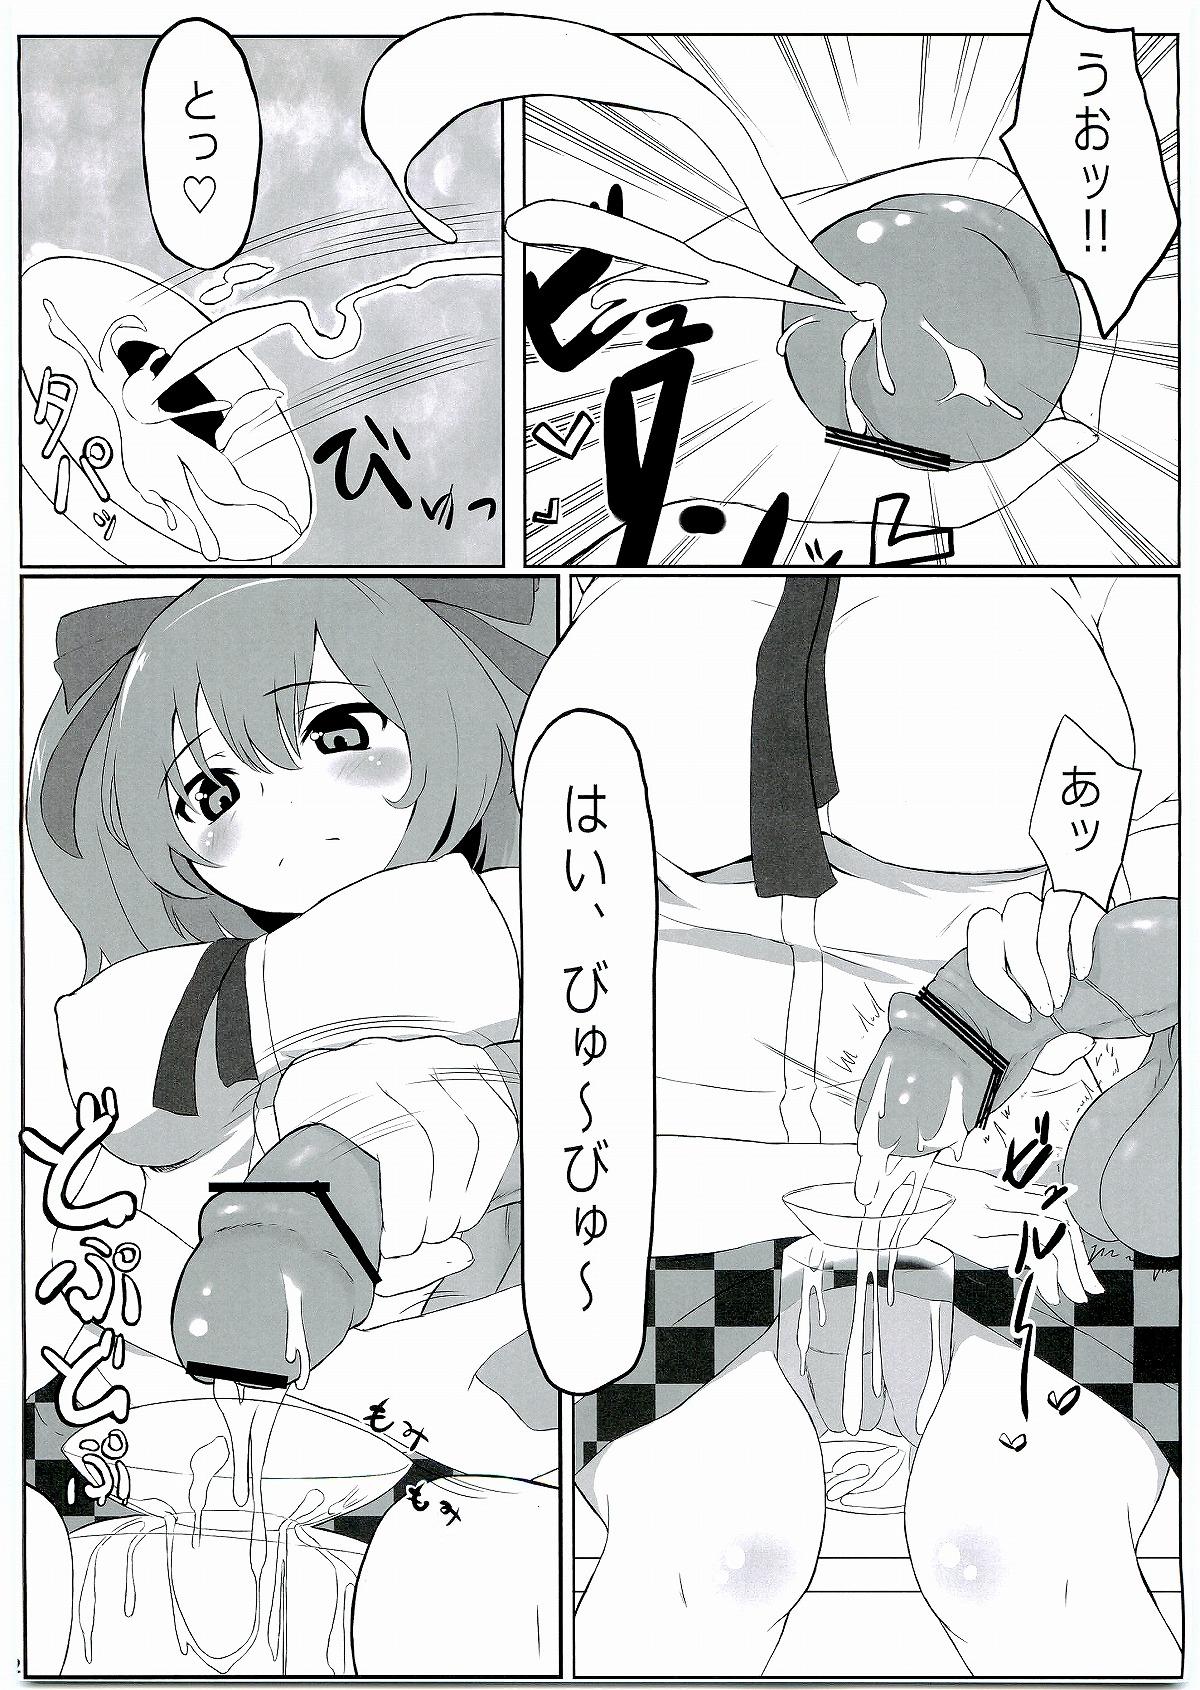 Thong KKMK Vol. 2 - Touhou project Small Boobs - Page 3